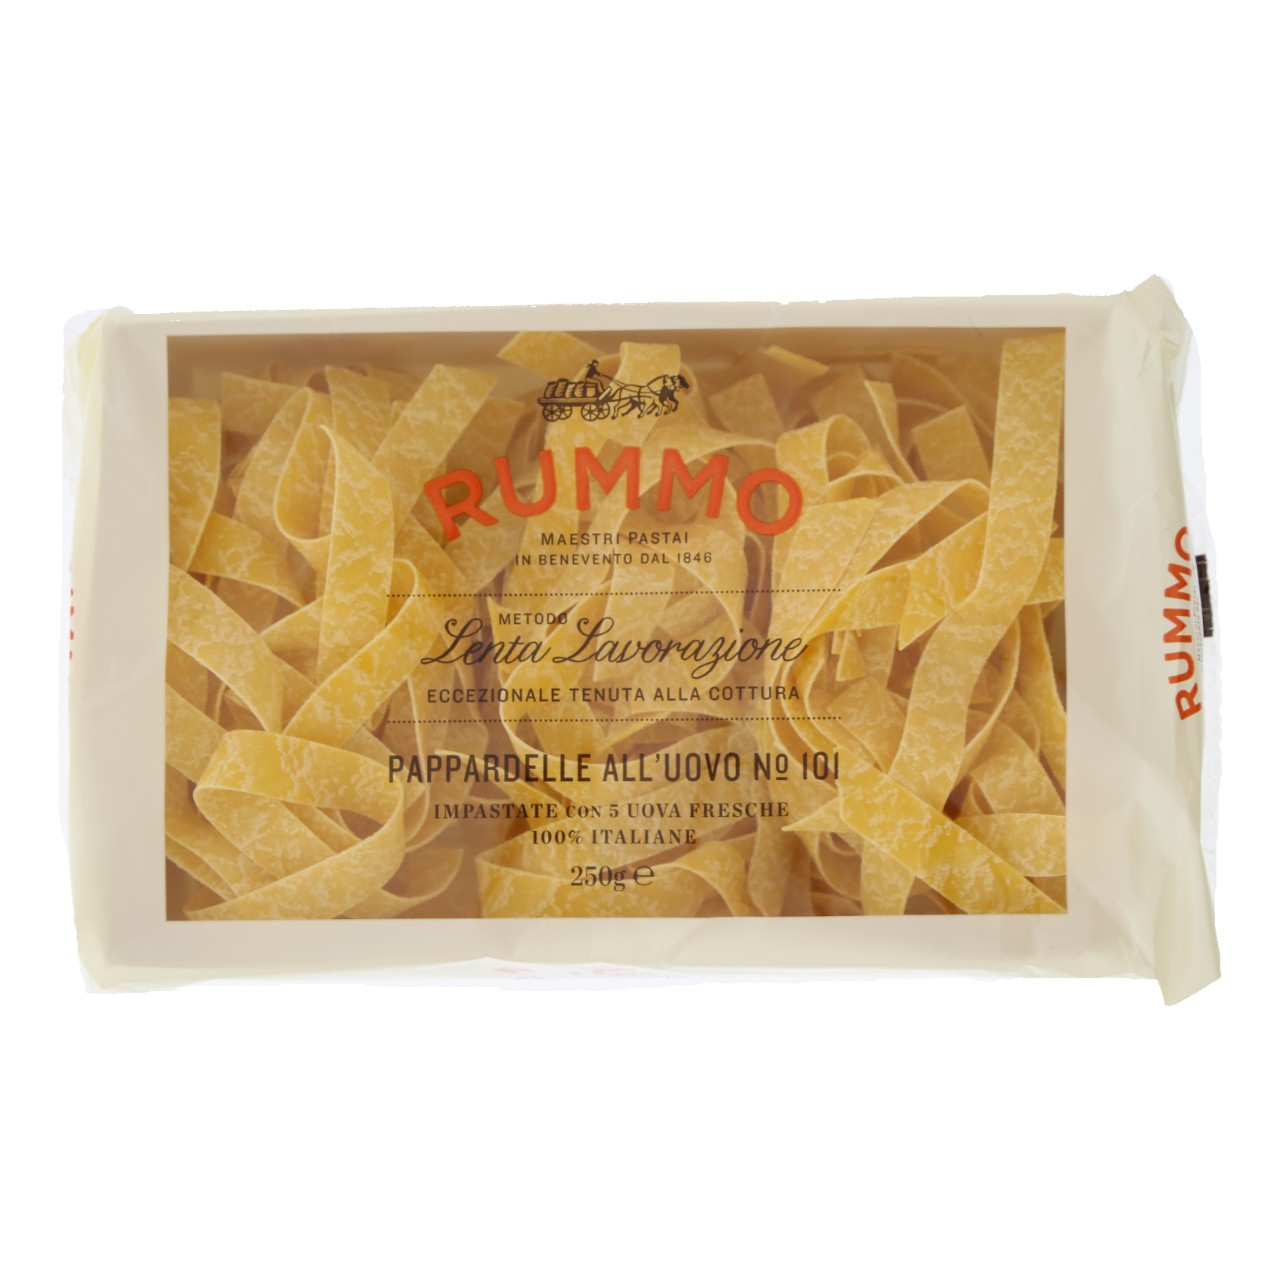 Pappardelle no. 101